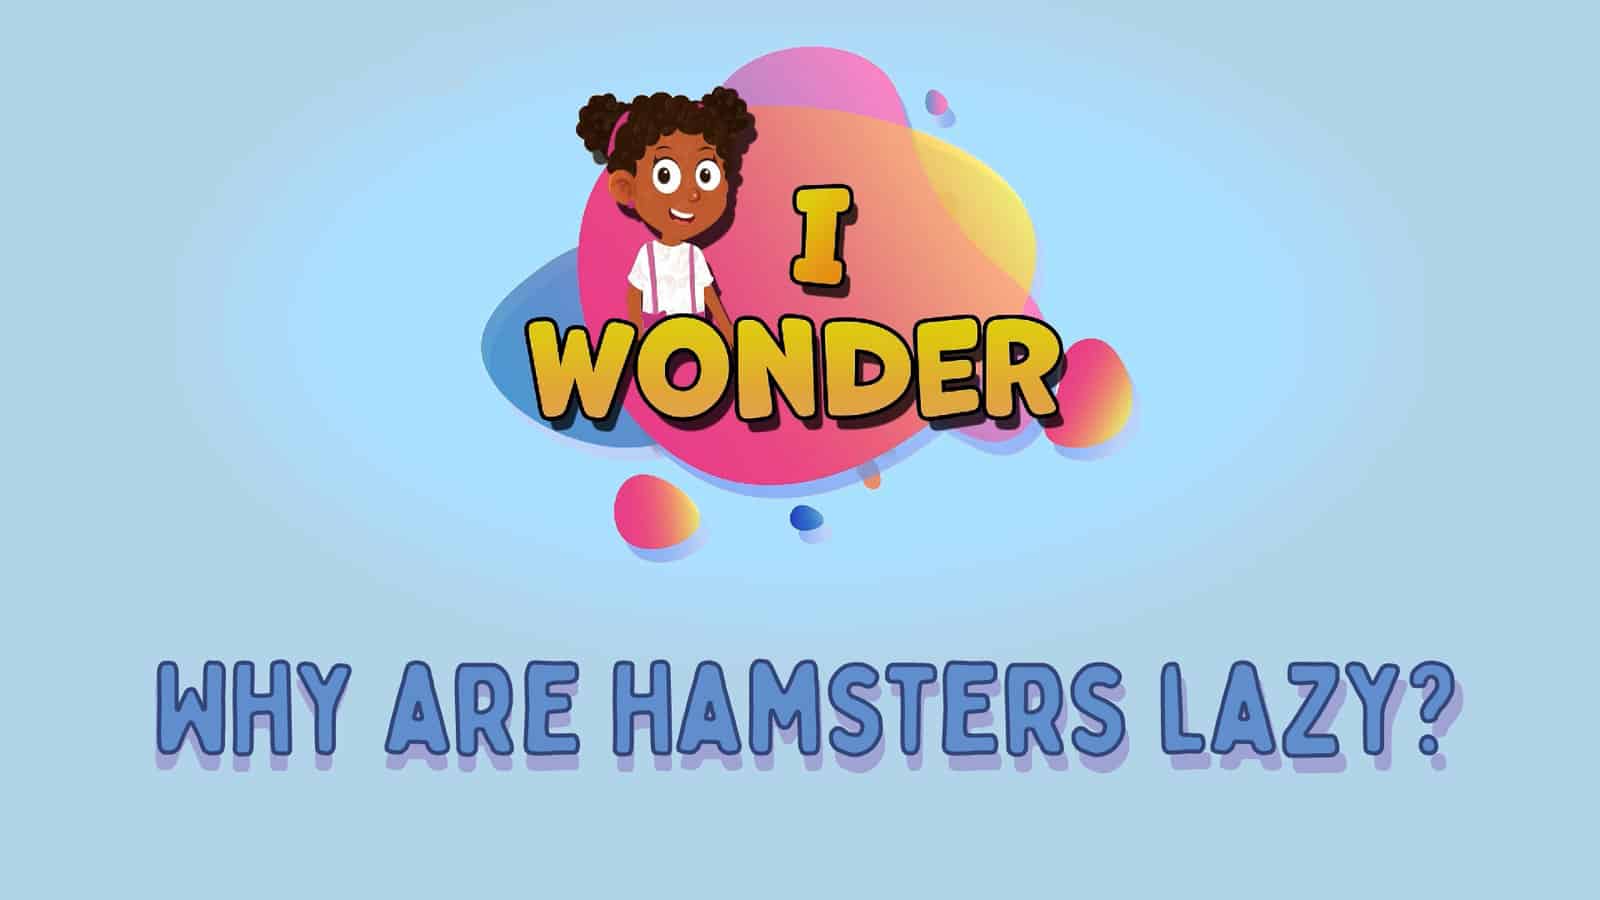 Why Are Hamsters Lazy?